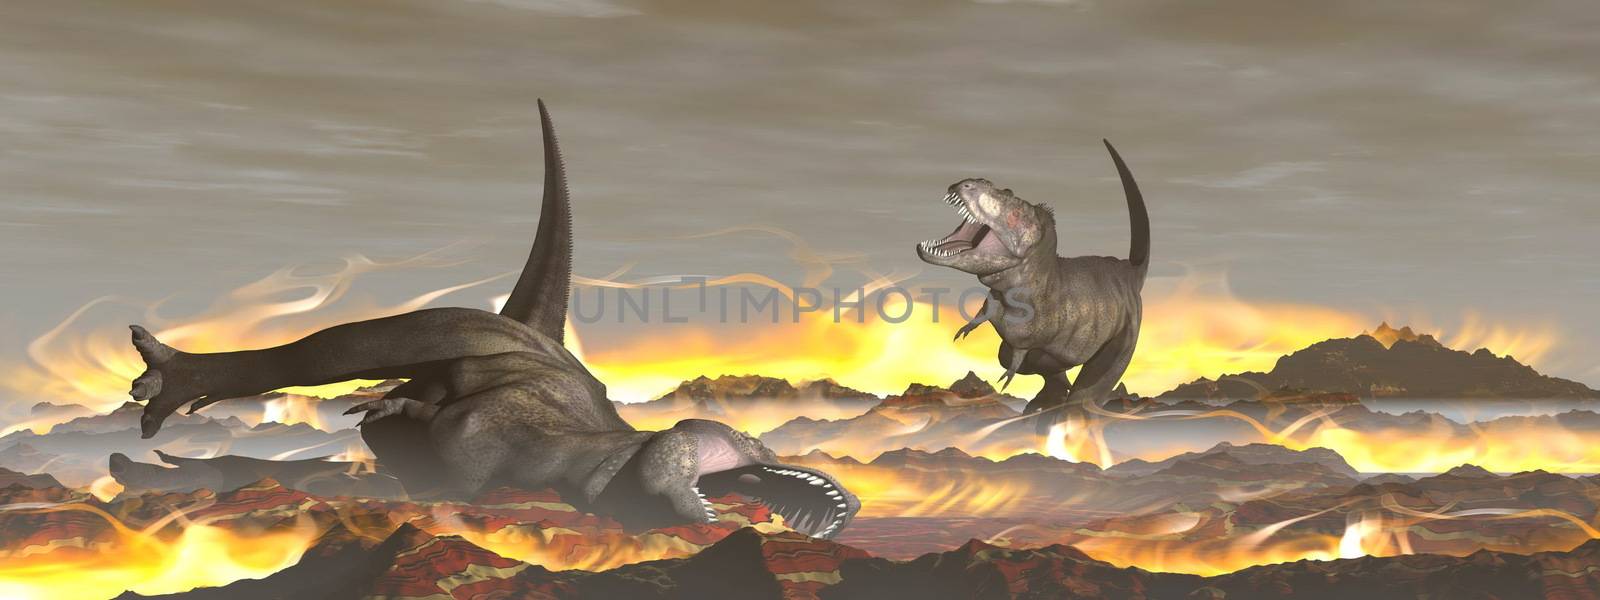 Tyrannosaurus dinosaurs escaping or dying because of heat and fire due to a big meteorite crash